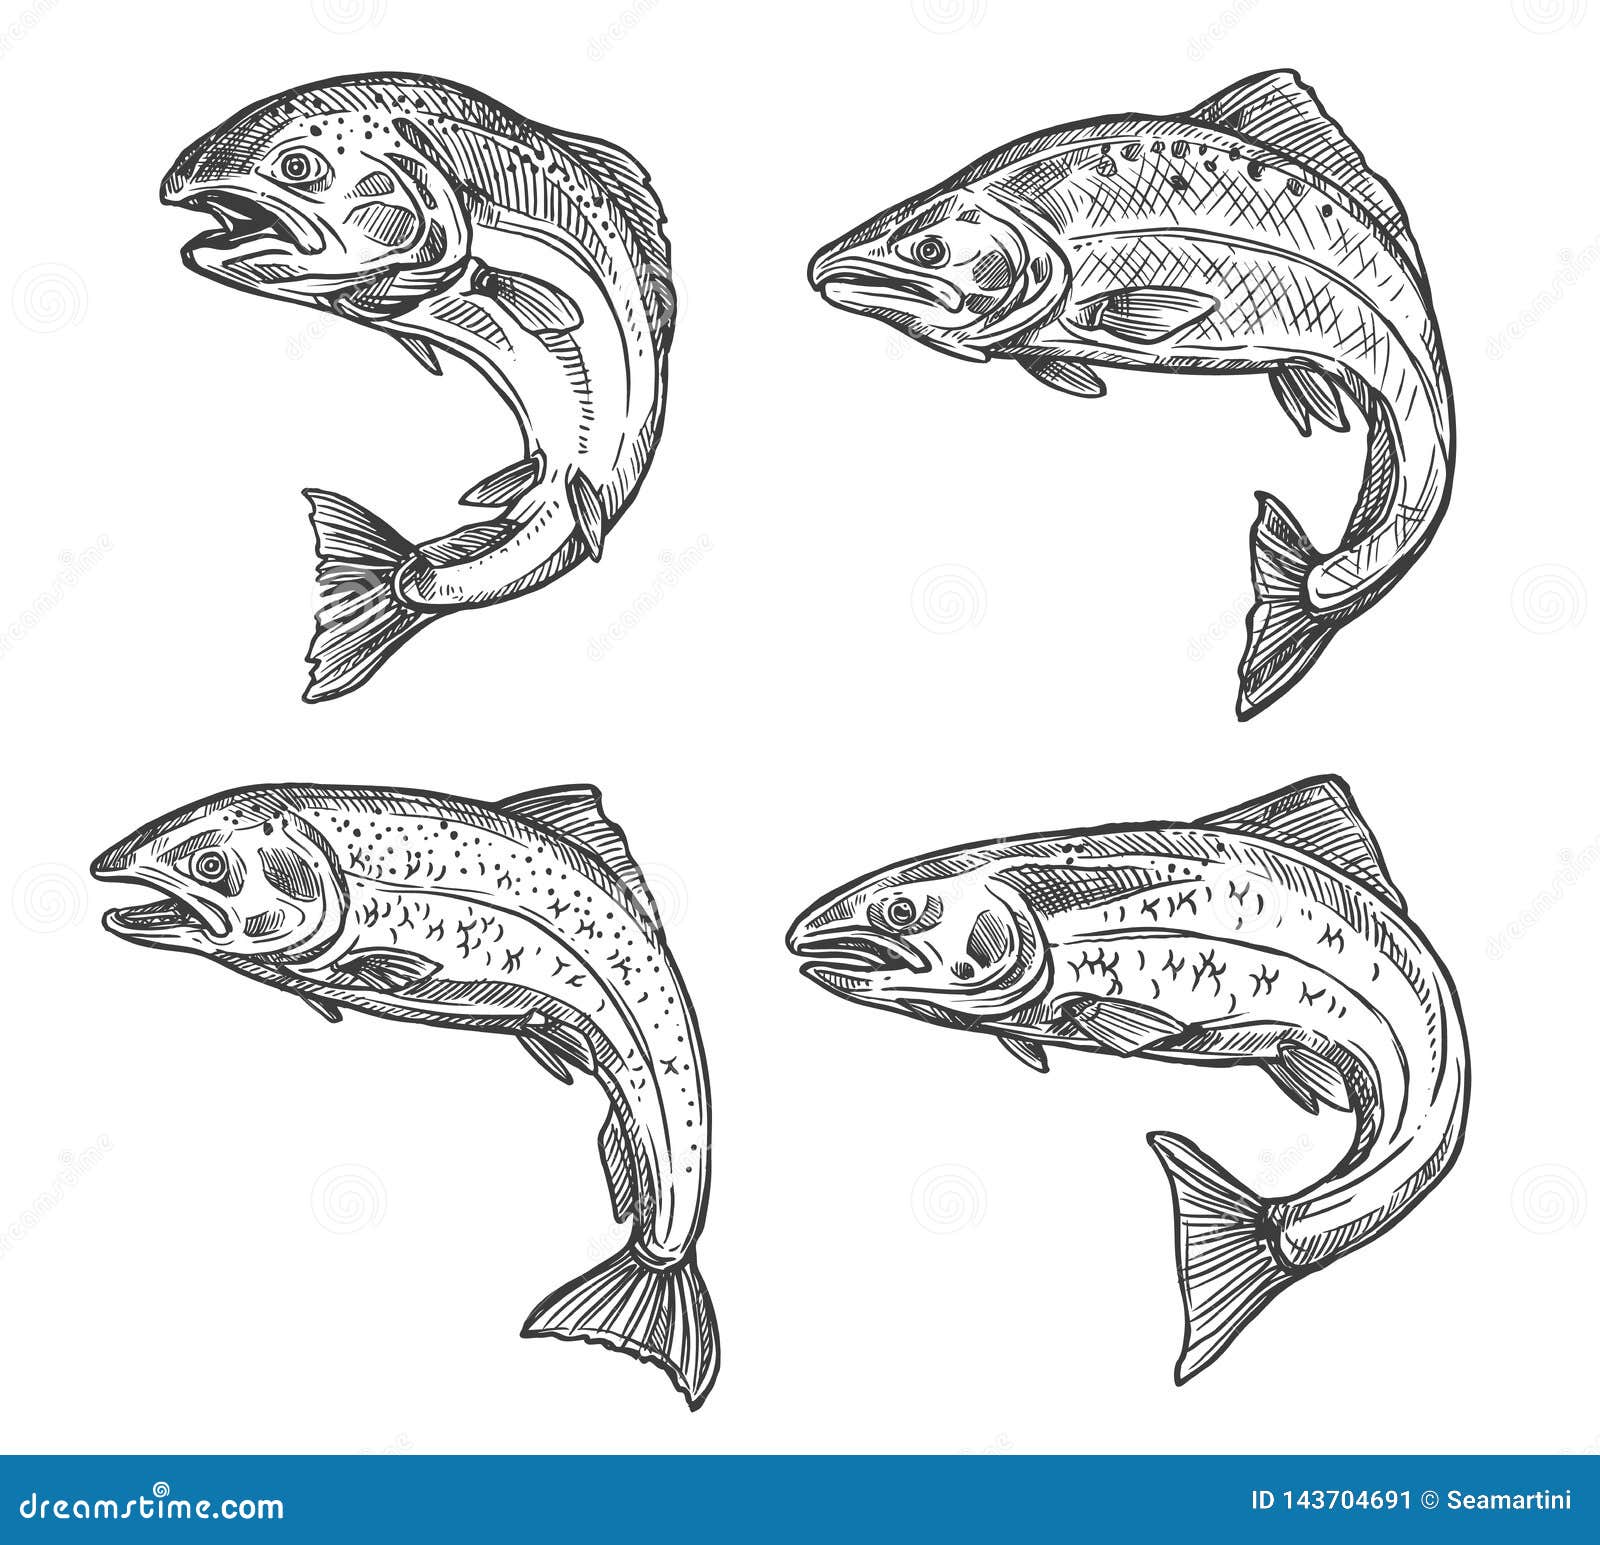 https://thumbs.dreamstime.com/z/fish-sketch-salmon-trout-fishing-catch-vector-isolated-icons-symbols-seafood-fisher-freshwater-river-saltwater-sea-143704691.jpg